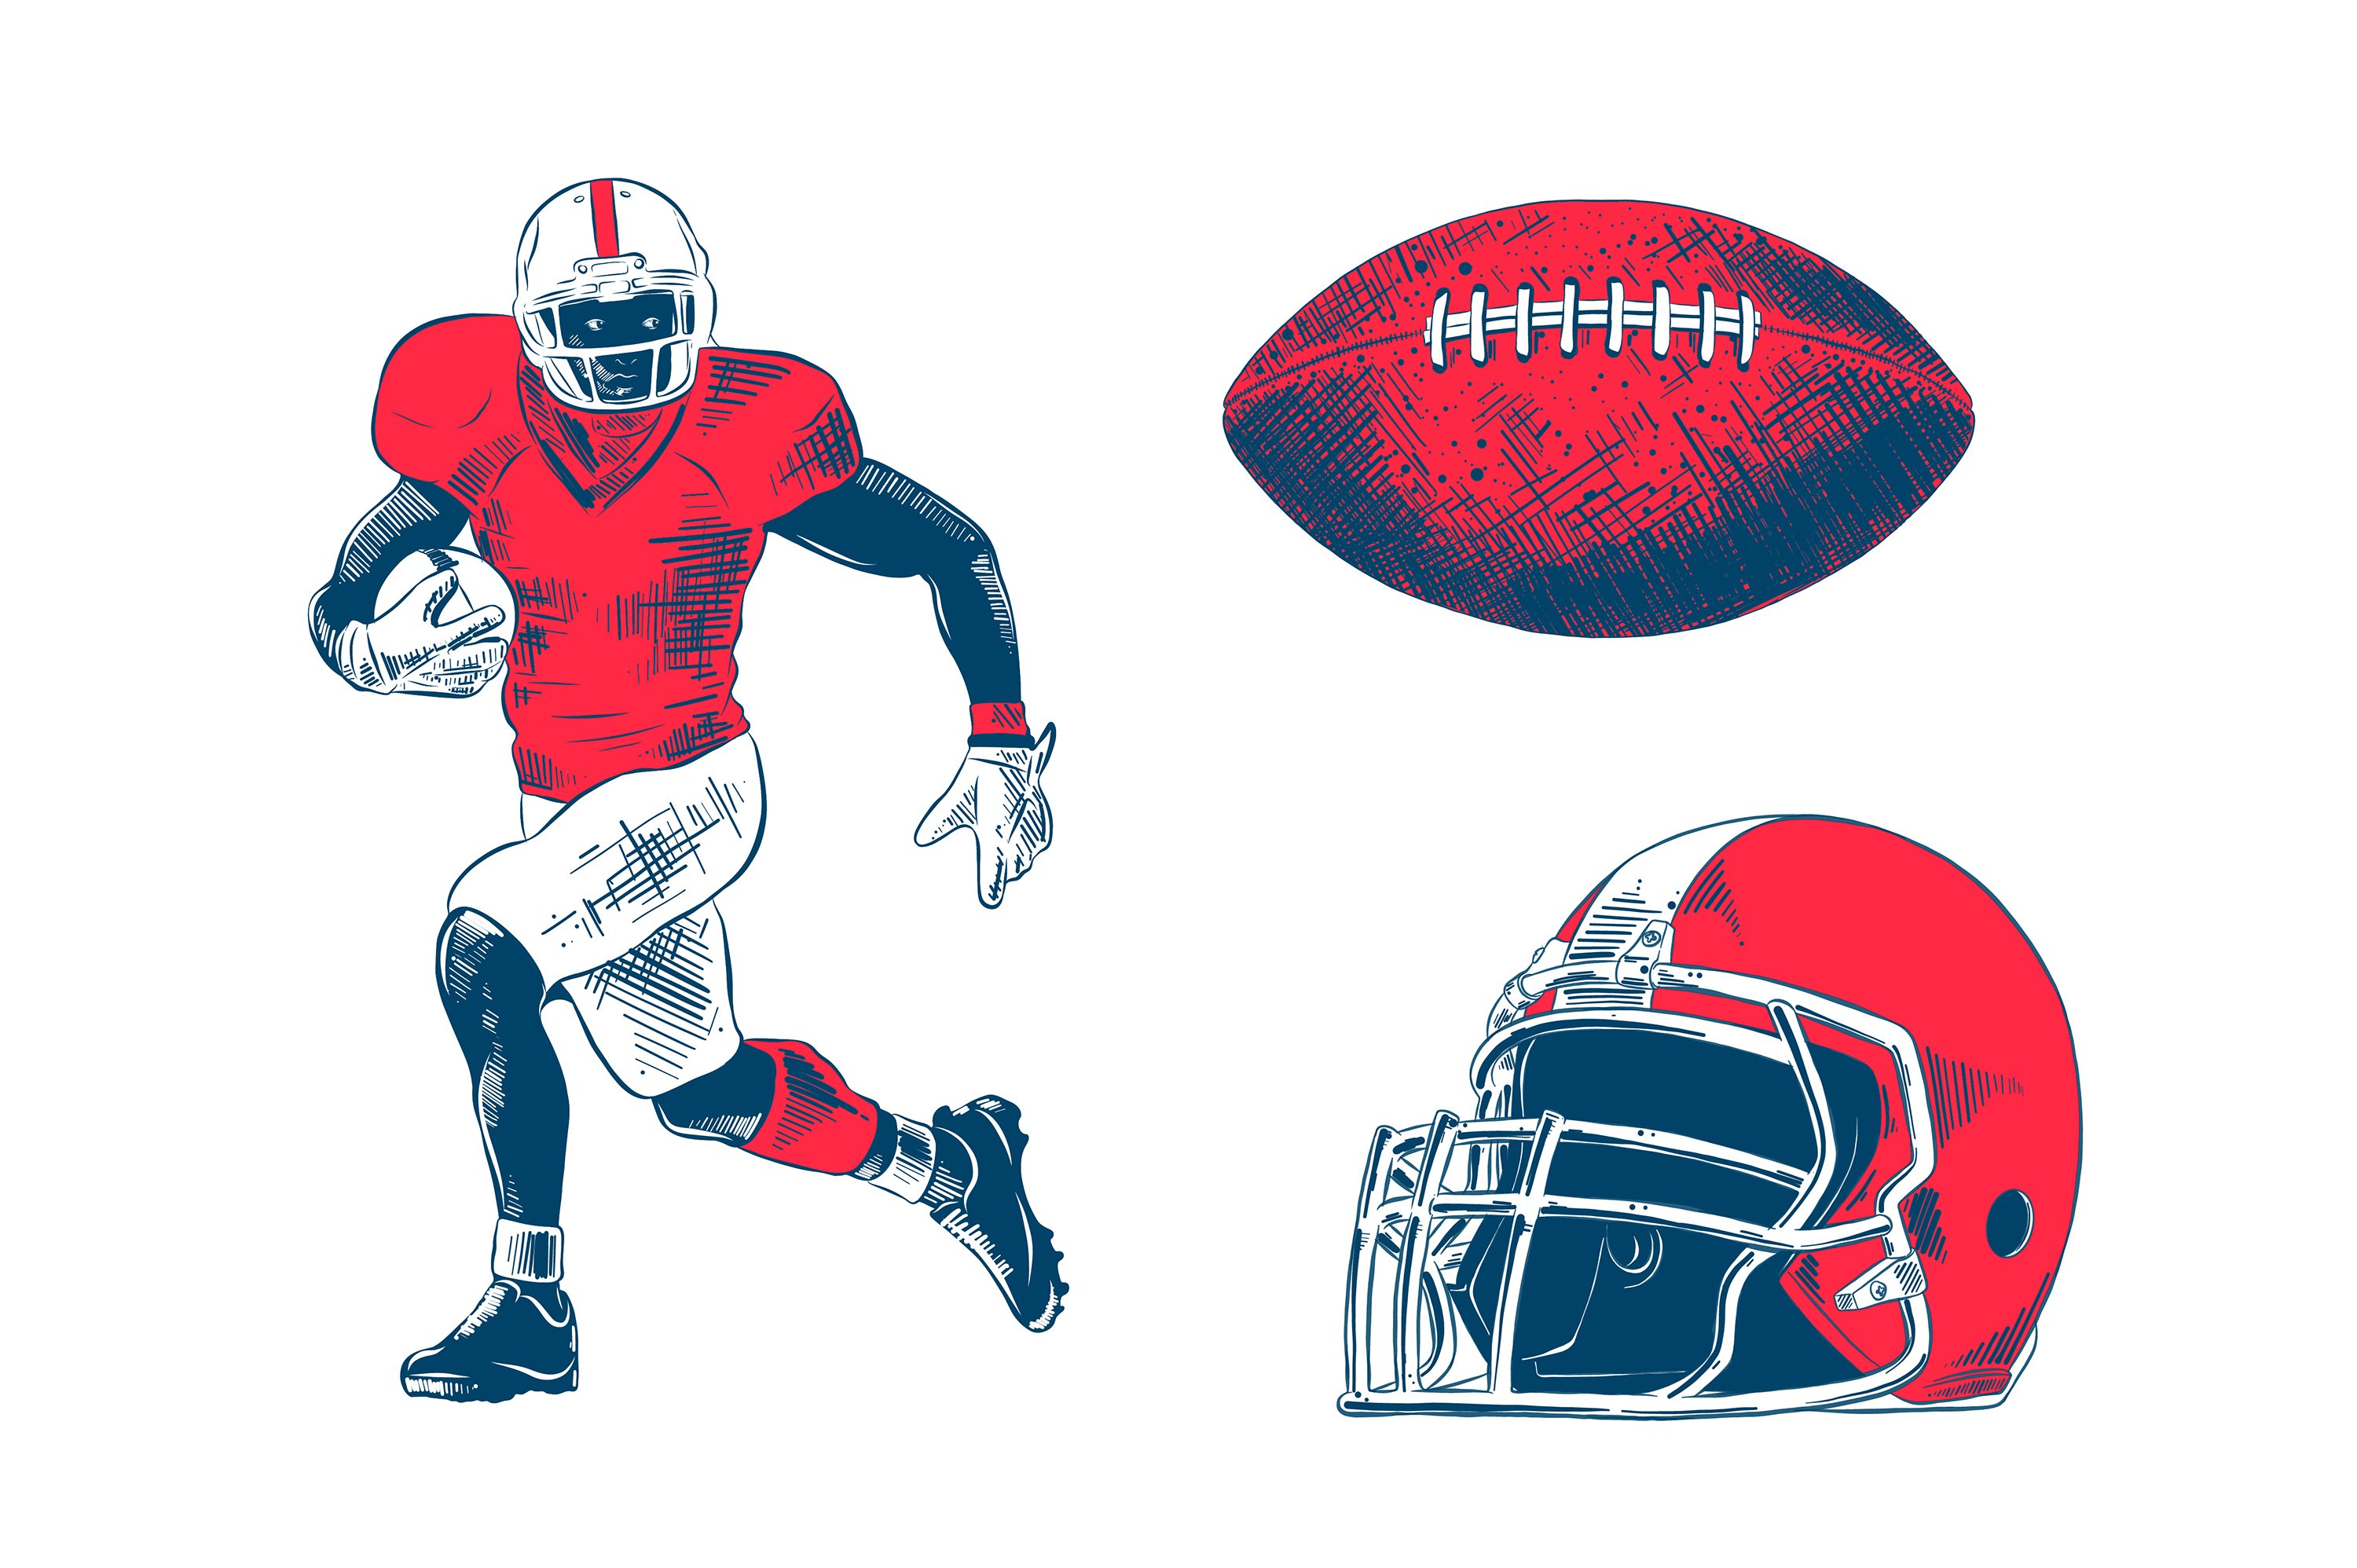 A drawing of a football and a football helmet.